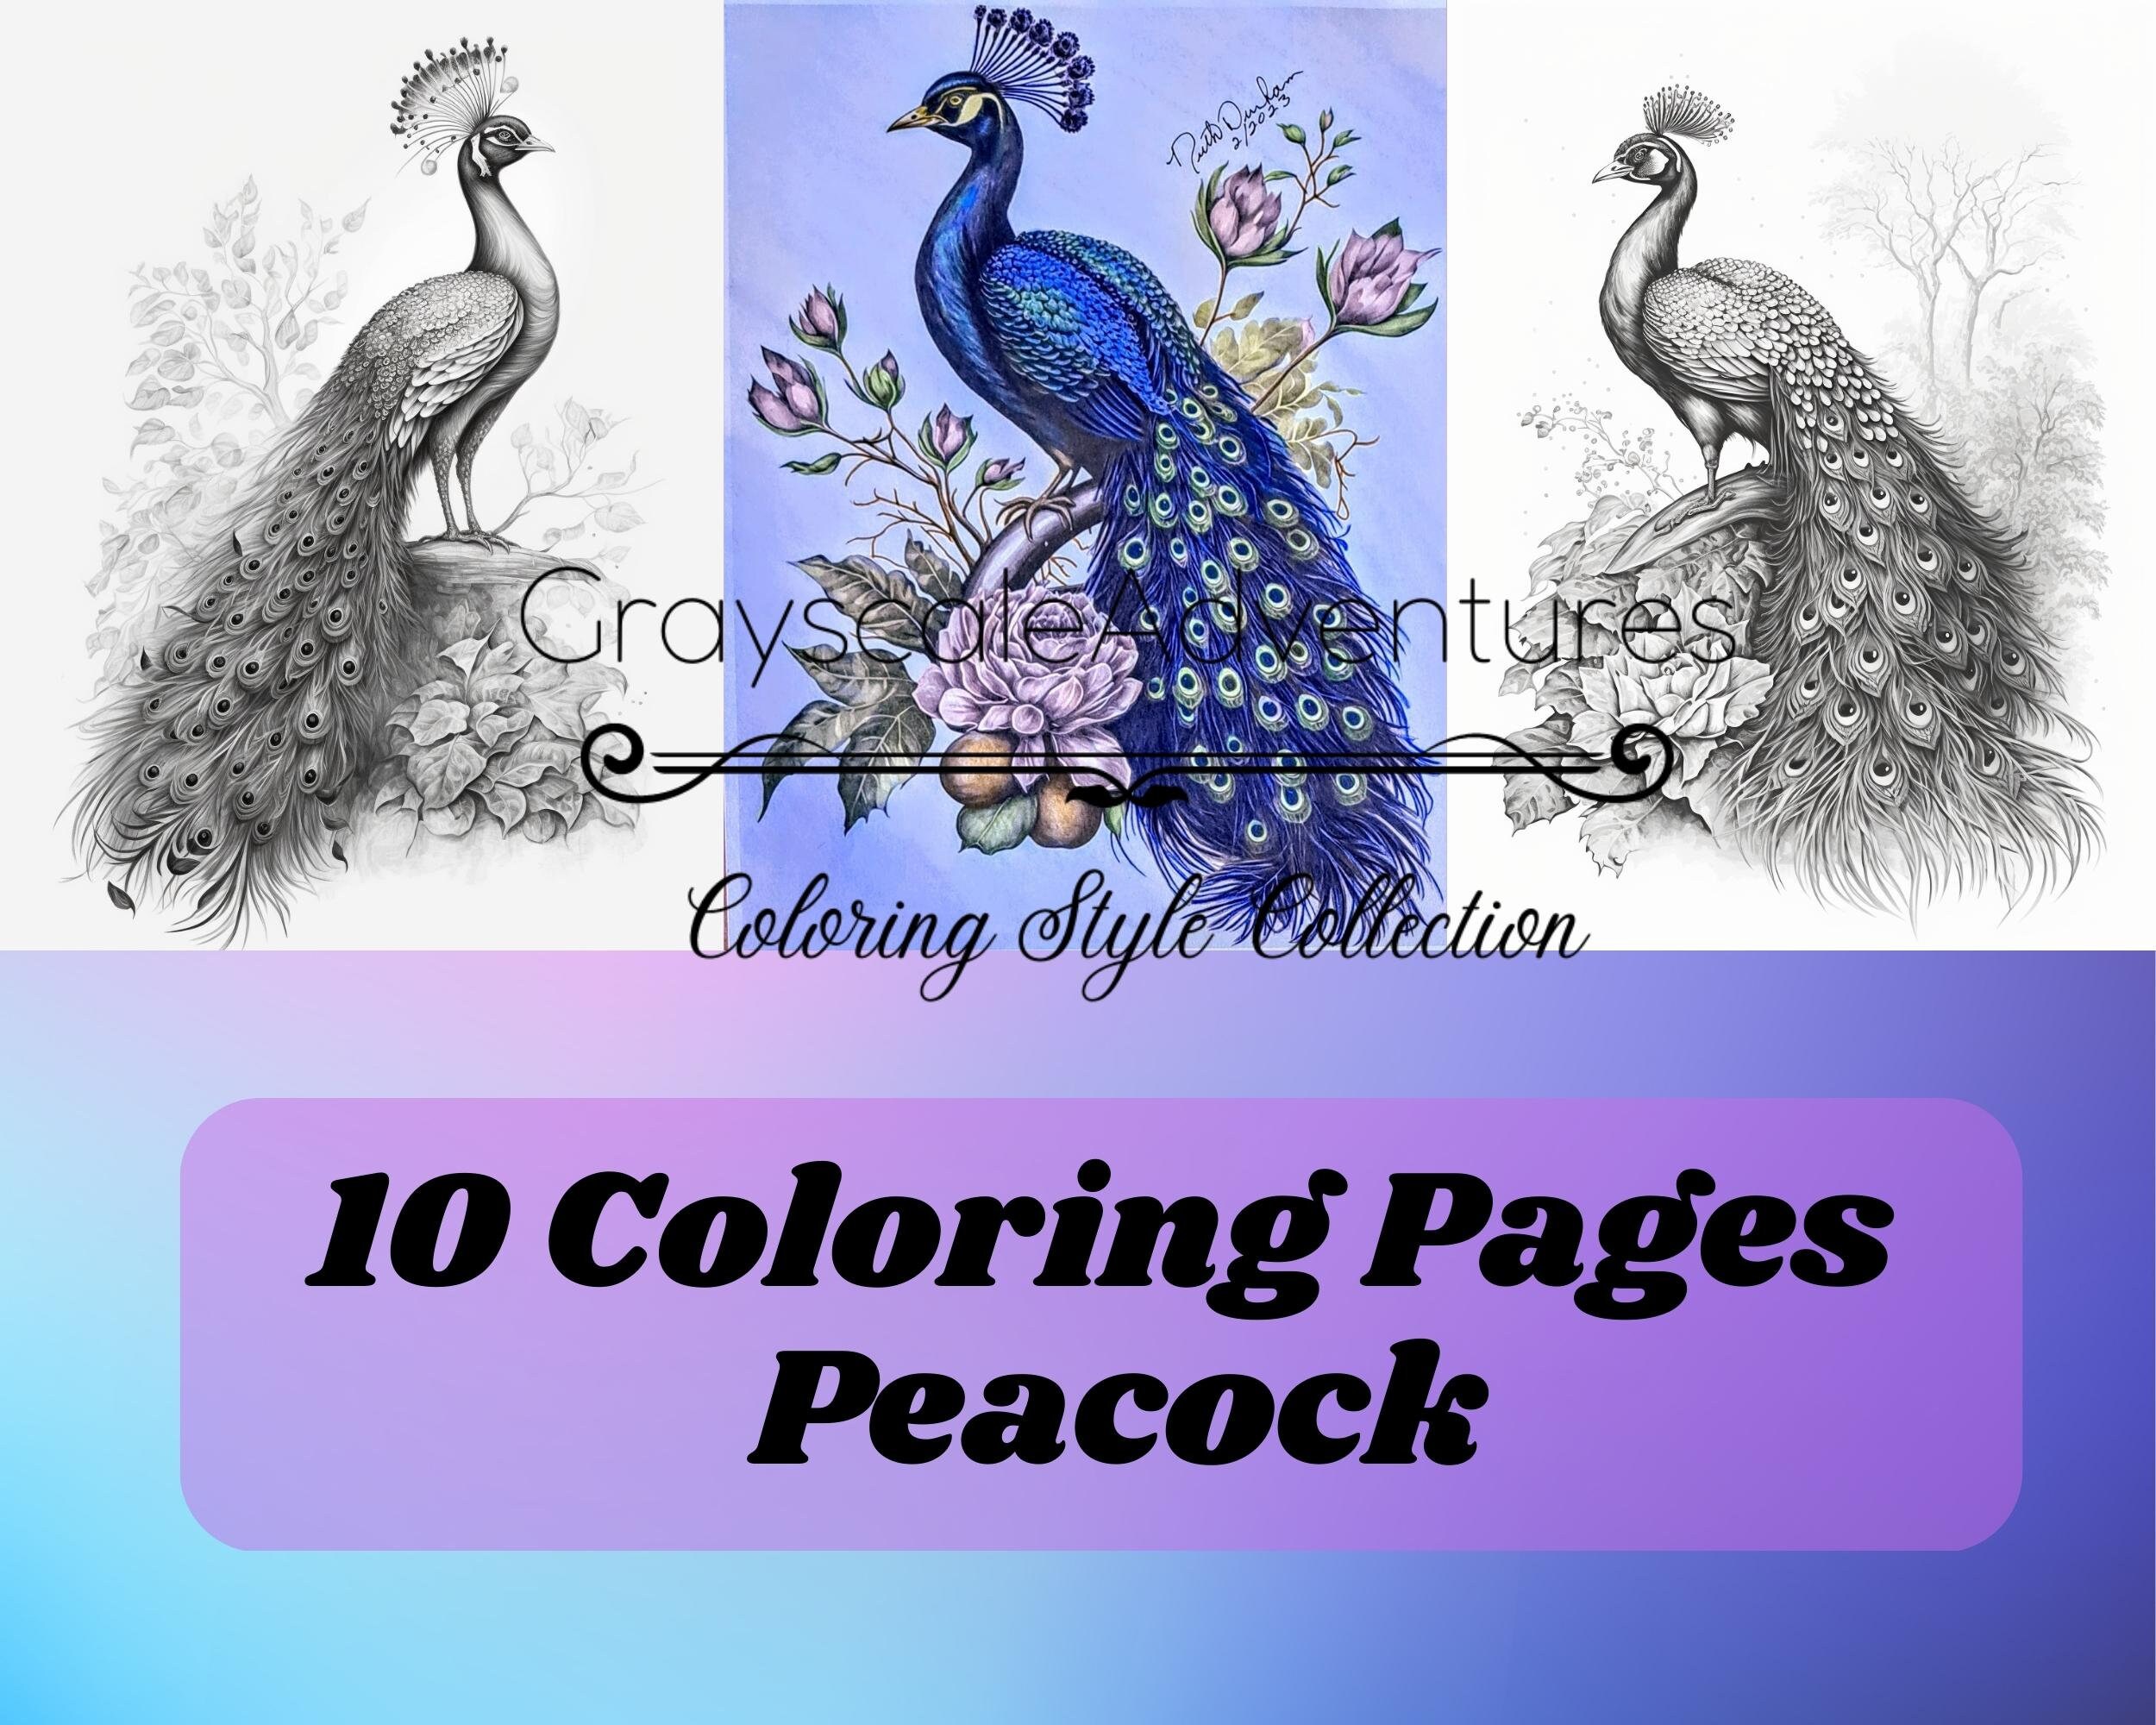 Coloring pages for adult coloring templates grayscale coloring book digital wall art grayscale page for instant download amazing peacock